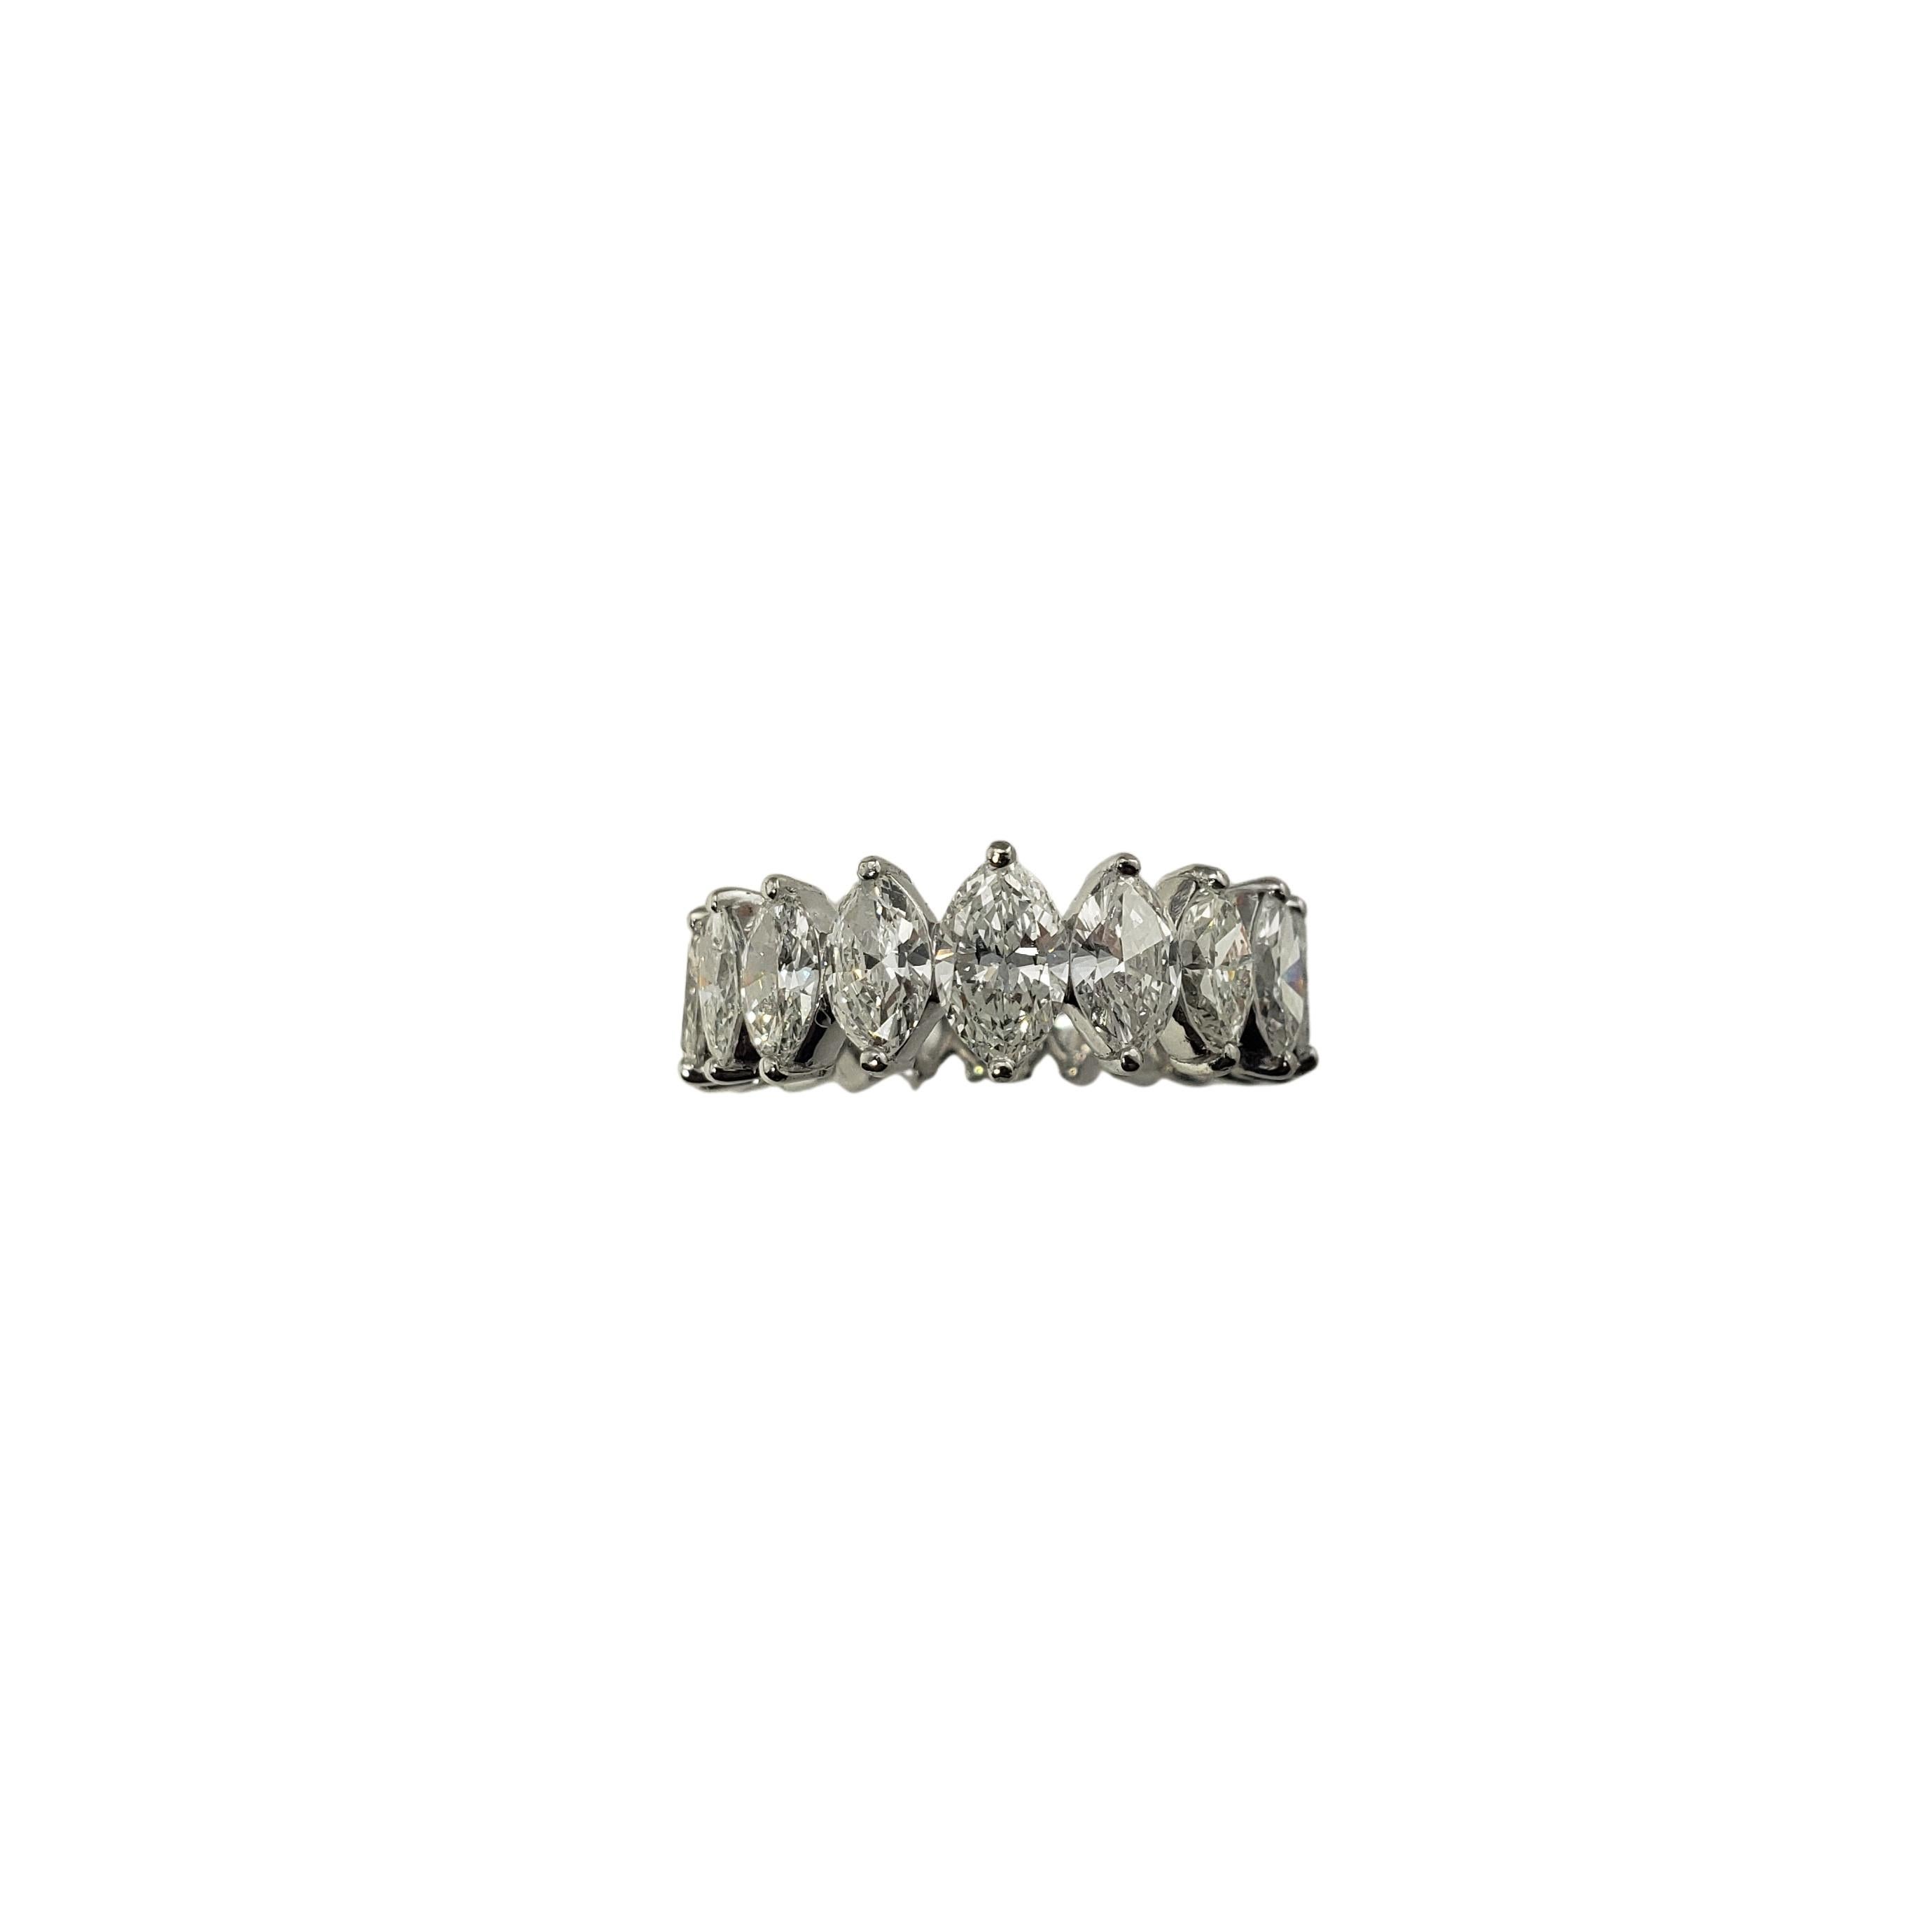 Vintage 14 Karat White Gold Marquise Diamond Eternity Band Ring Size 6.75-

This sparkling eternity band features 21 graduated marquis diamonds set in classic 14K white gold.  Width:  8 mm.

Approximate total diamond weight:  3.85 cts (largest stone